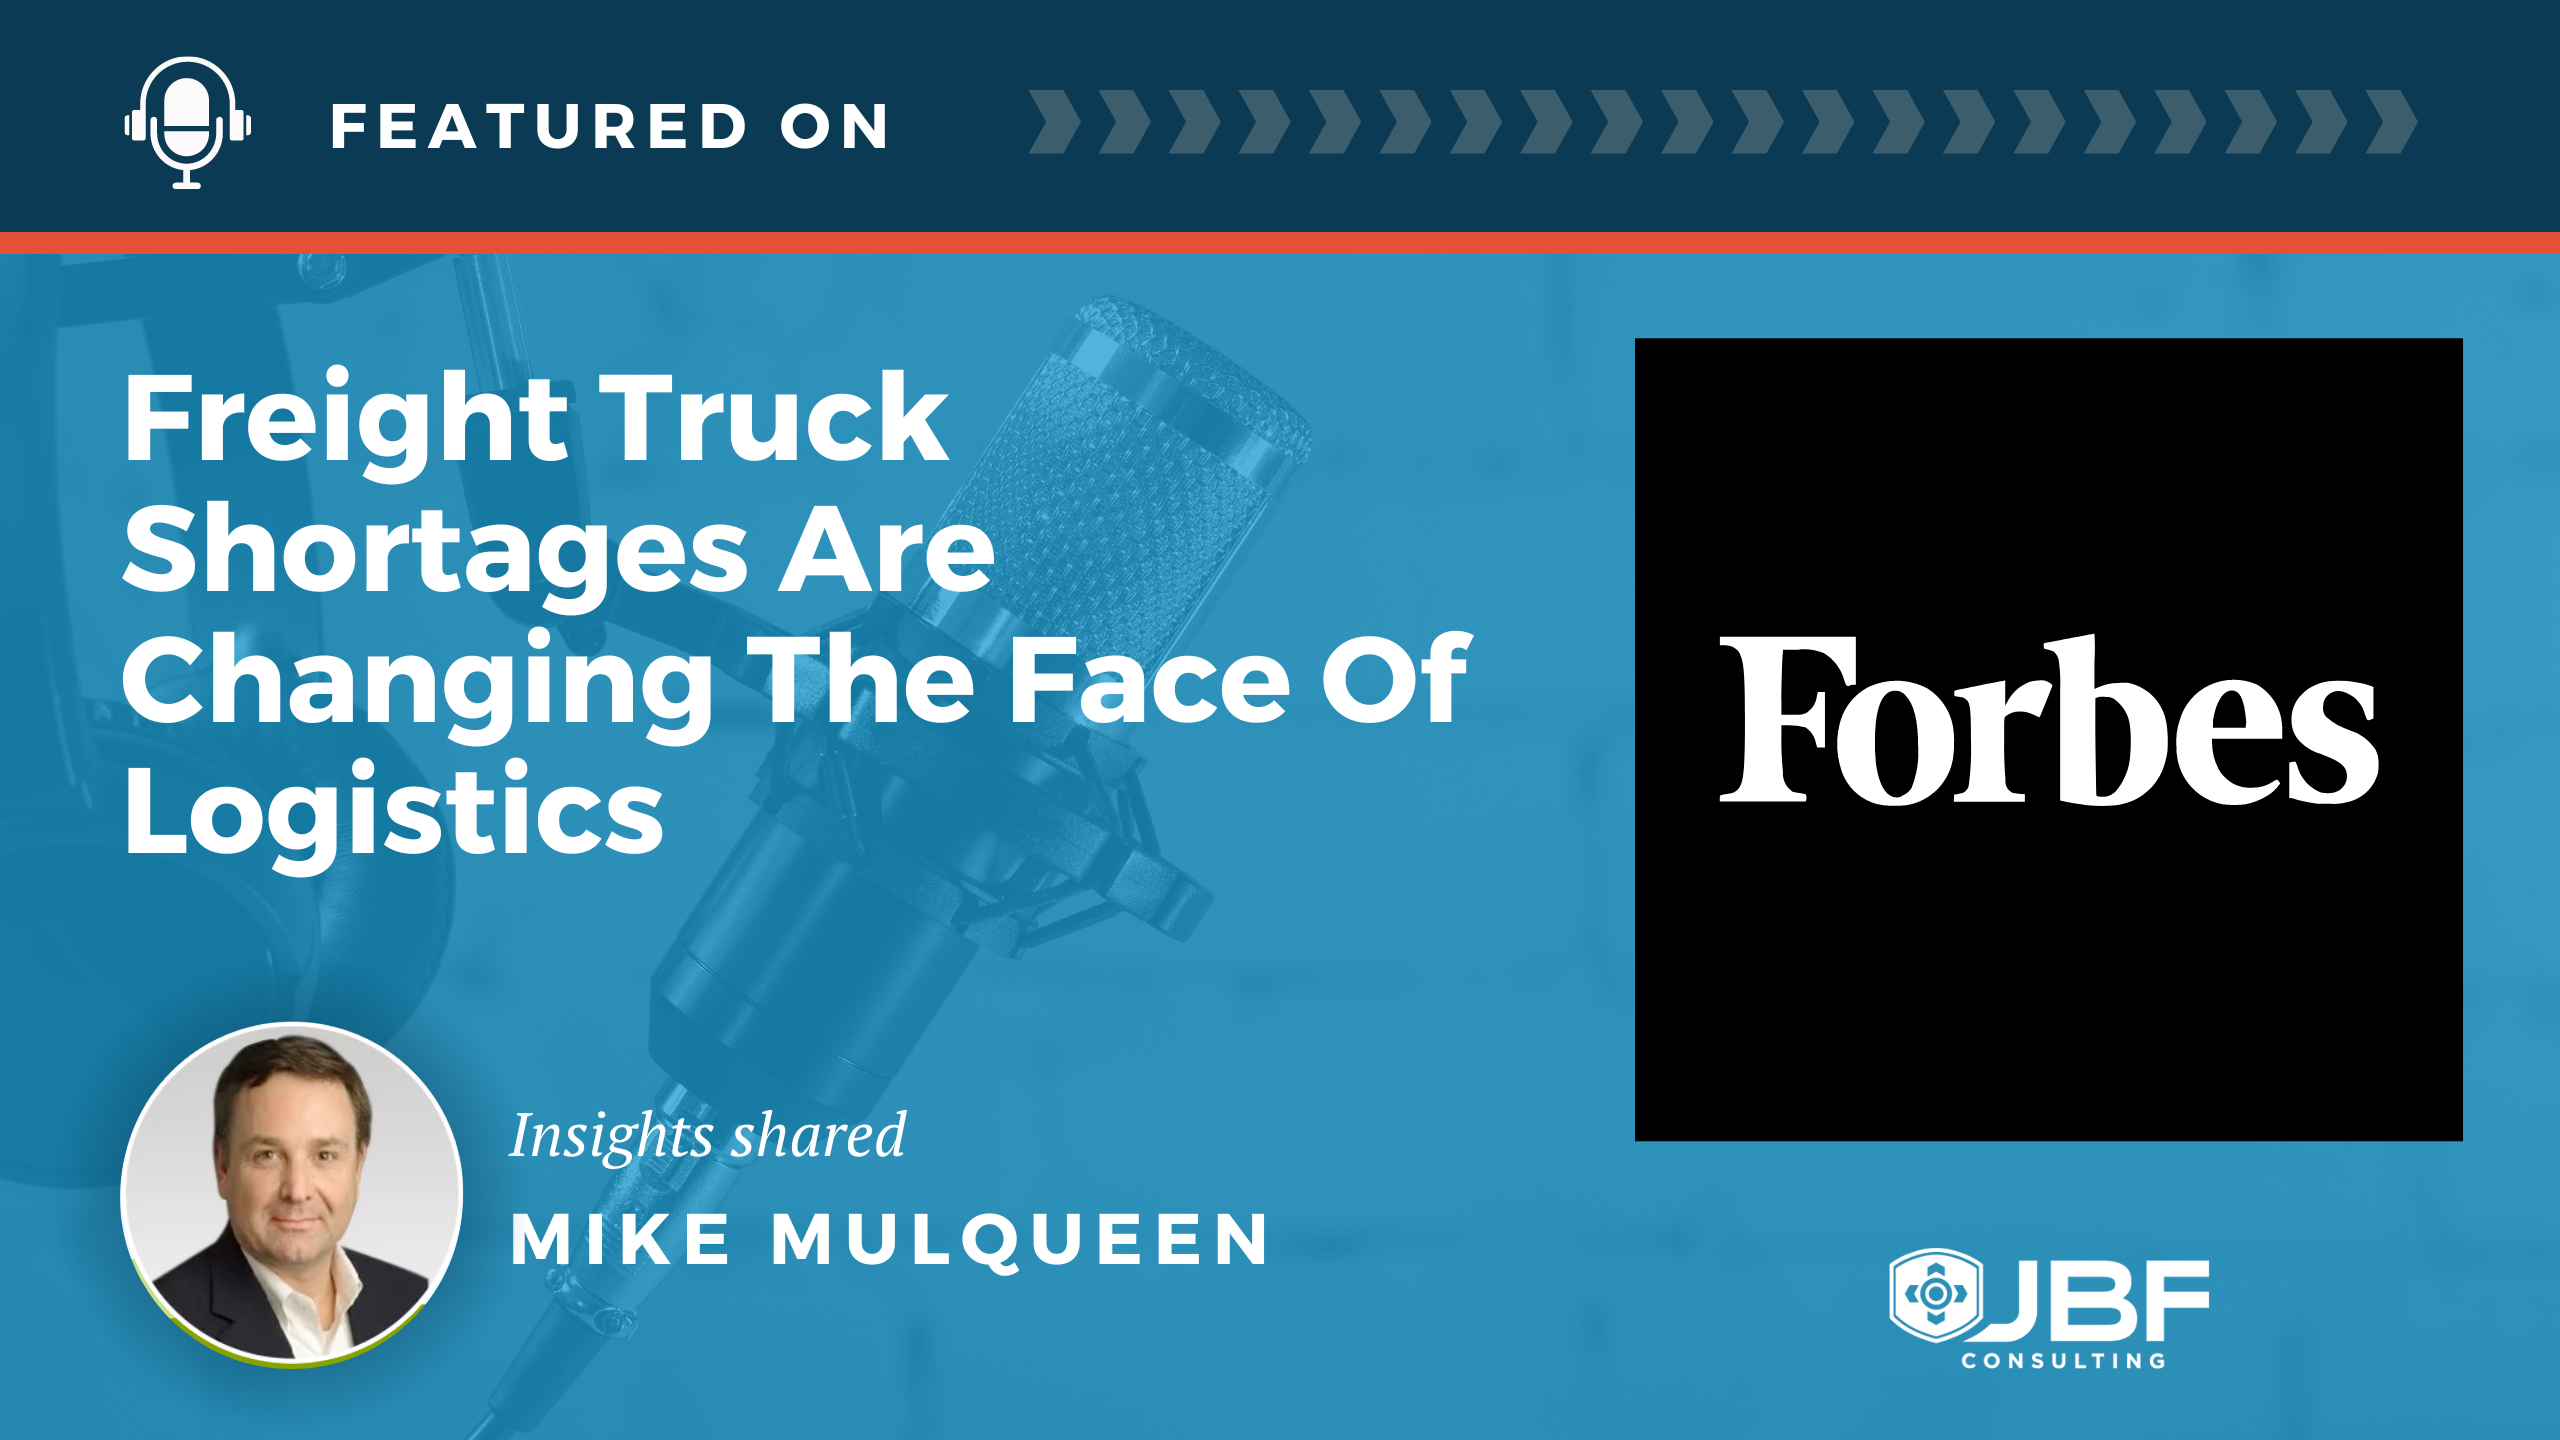 Freight Truck Shortages Are Changing The Face Of Logistics